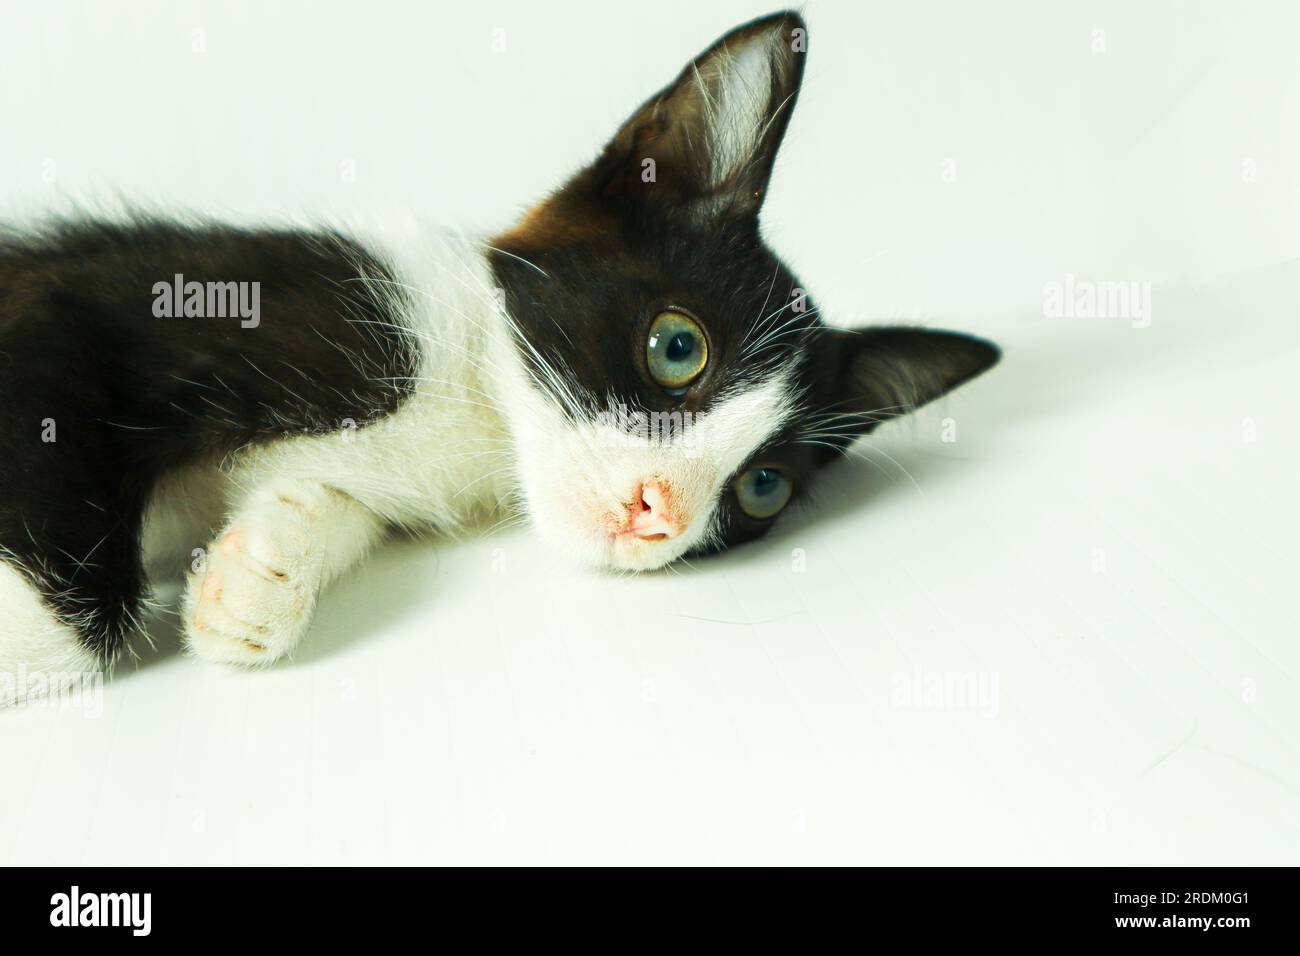 Black and white kitten with blue eyes lying on a white background. Stock Photo